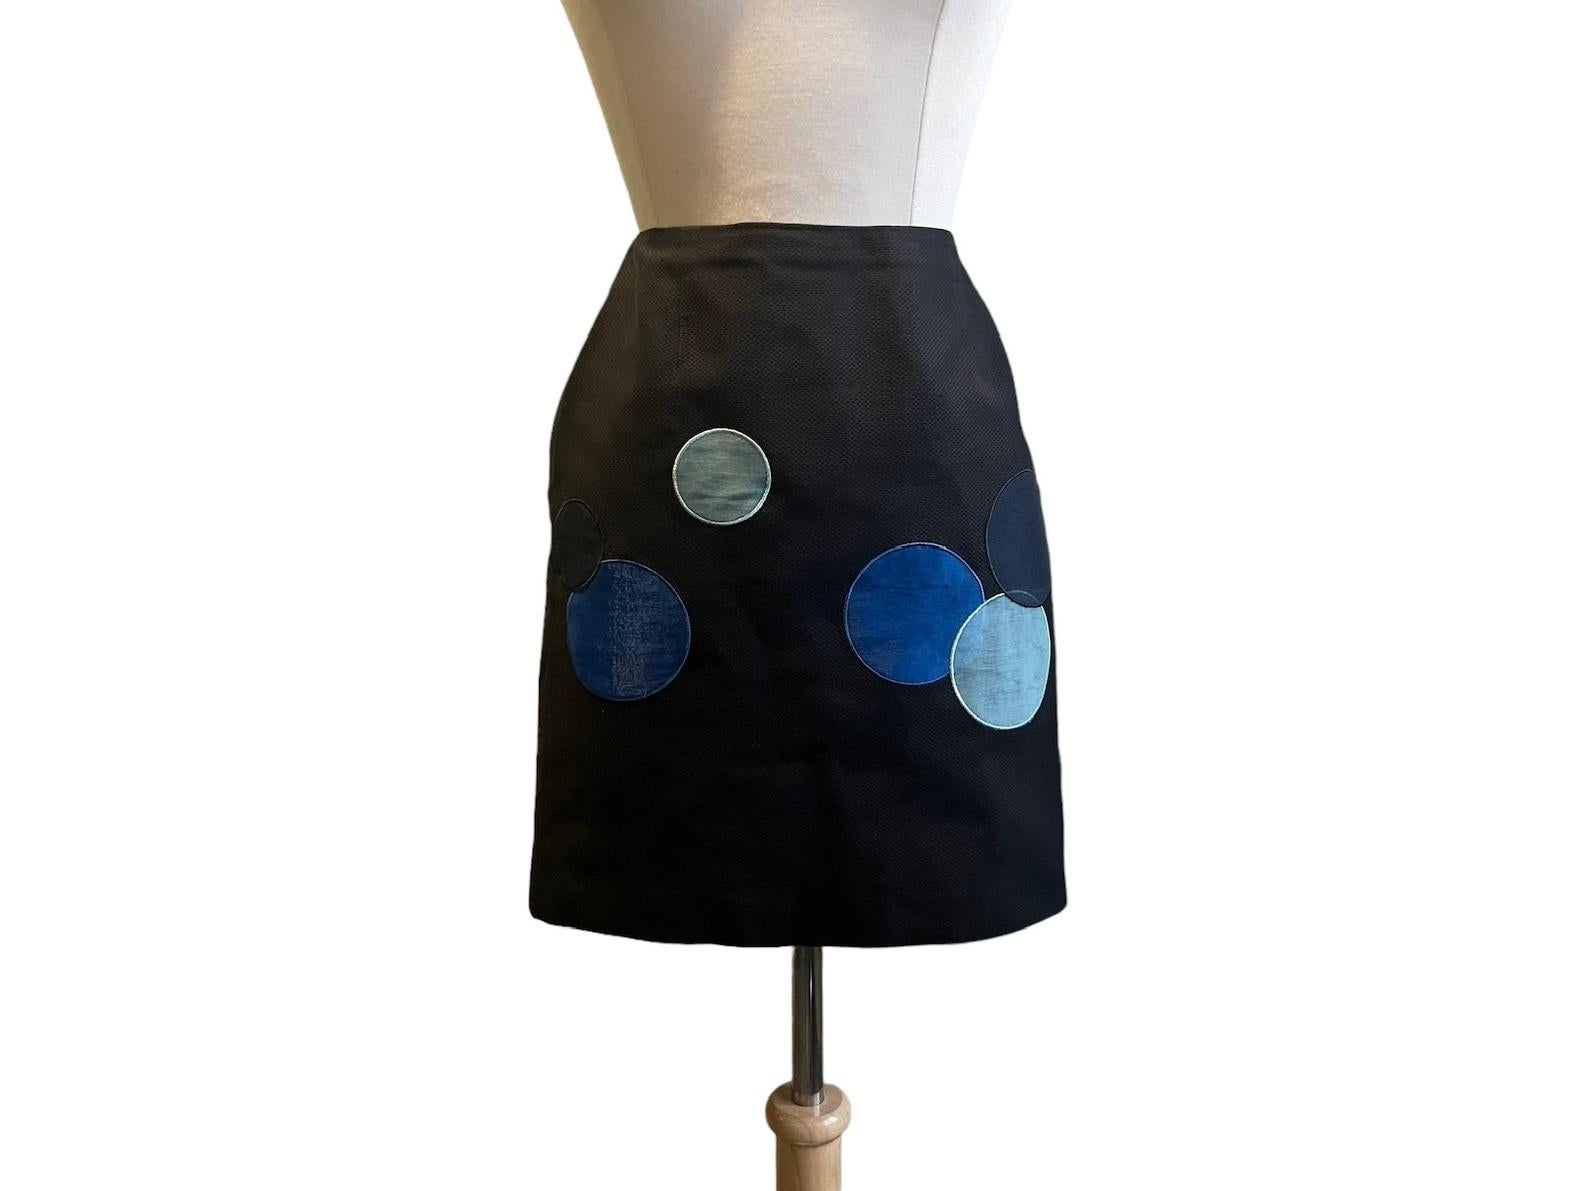 Moschino navy blue cotton pique mini skirt. straight silhouette. large scale dots in three shades of blue in appliquéd organza on the front and back of skirt. side zip closure. skirt is lined.

✩ This skirt is a rare find! It's the blue version of